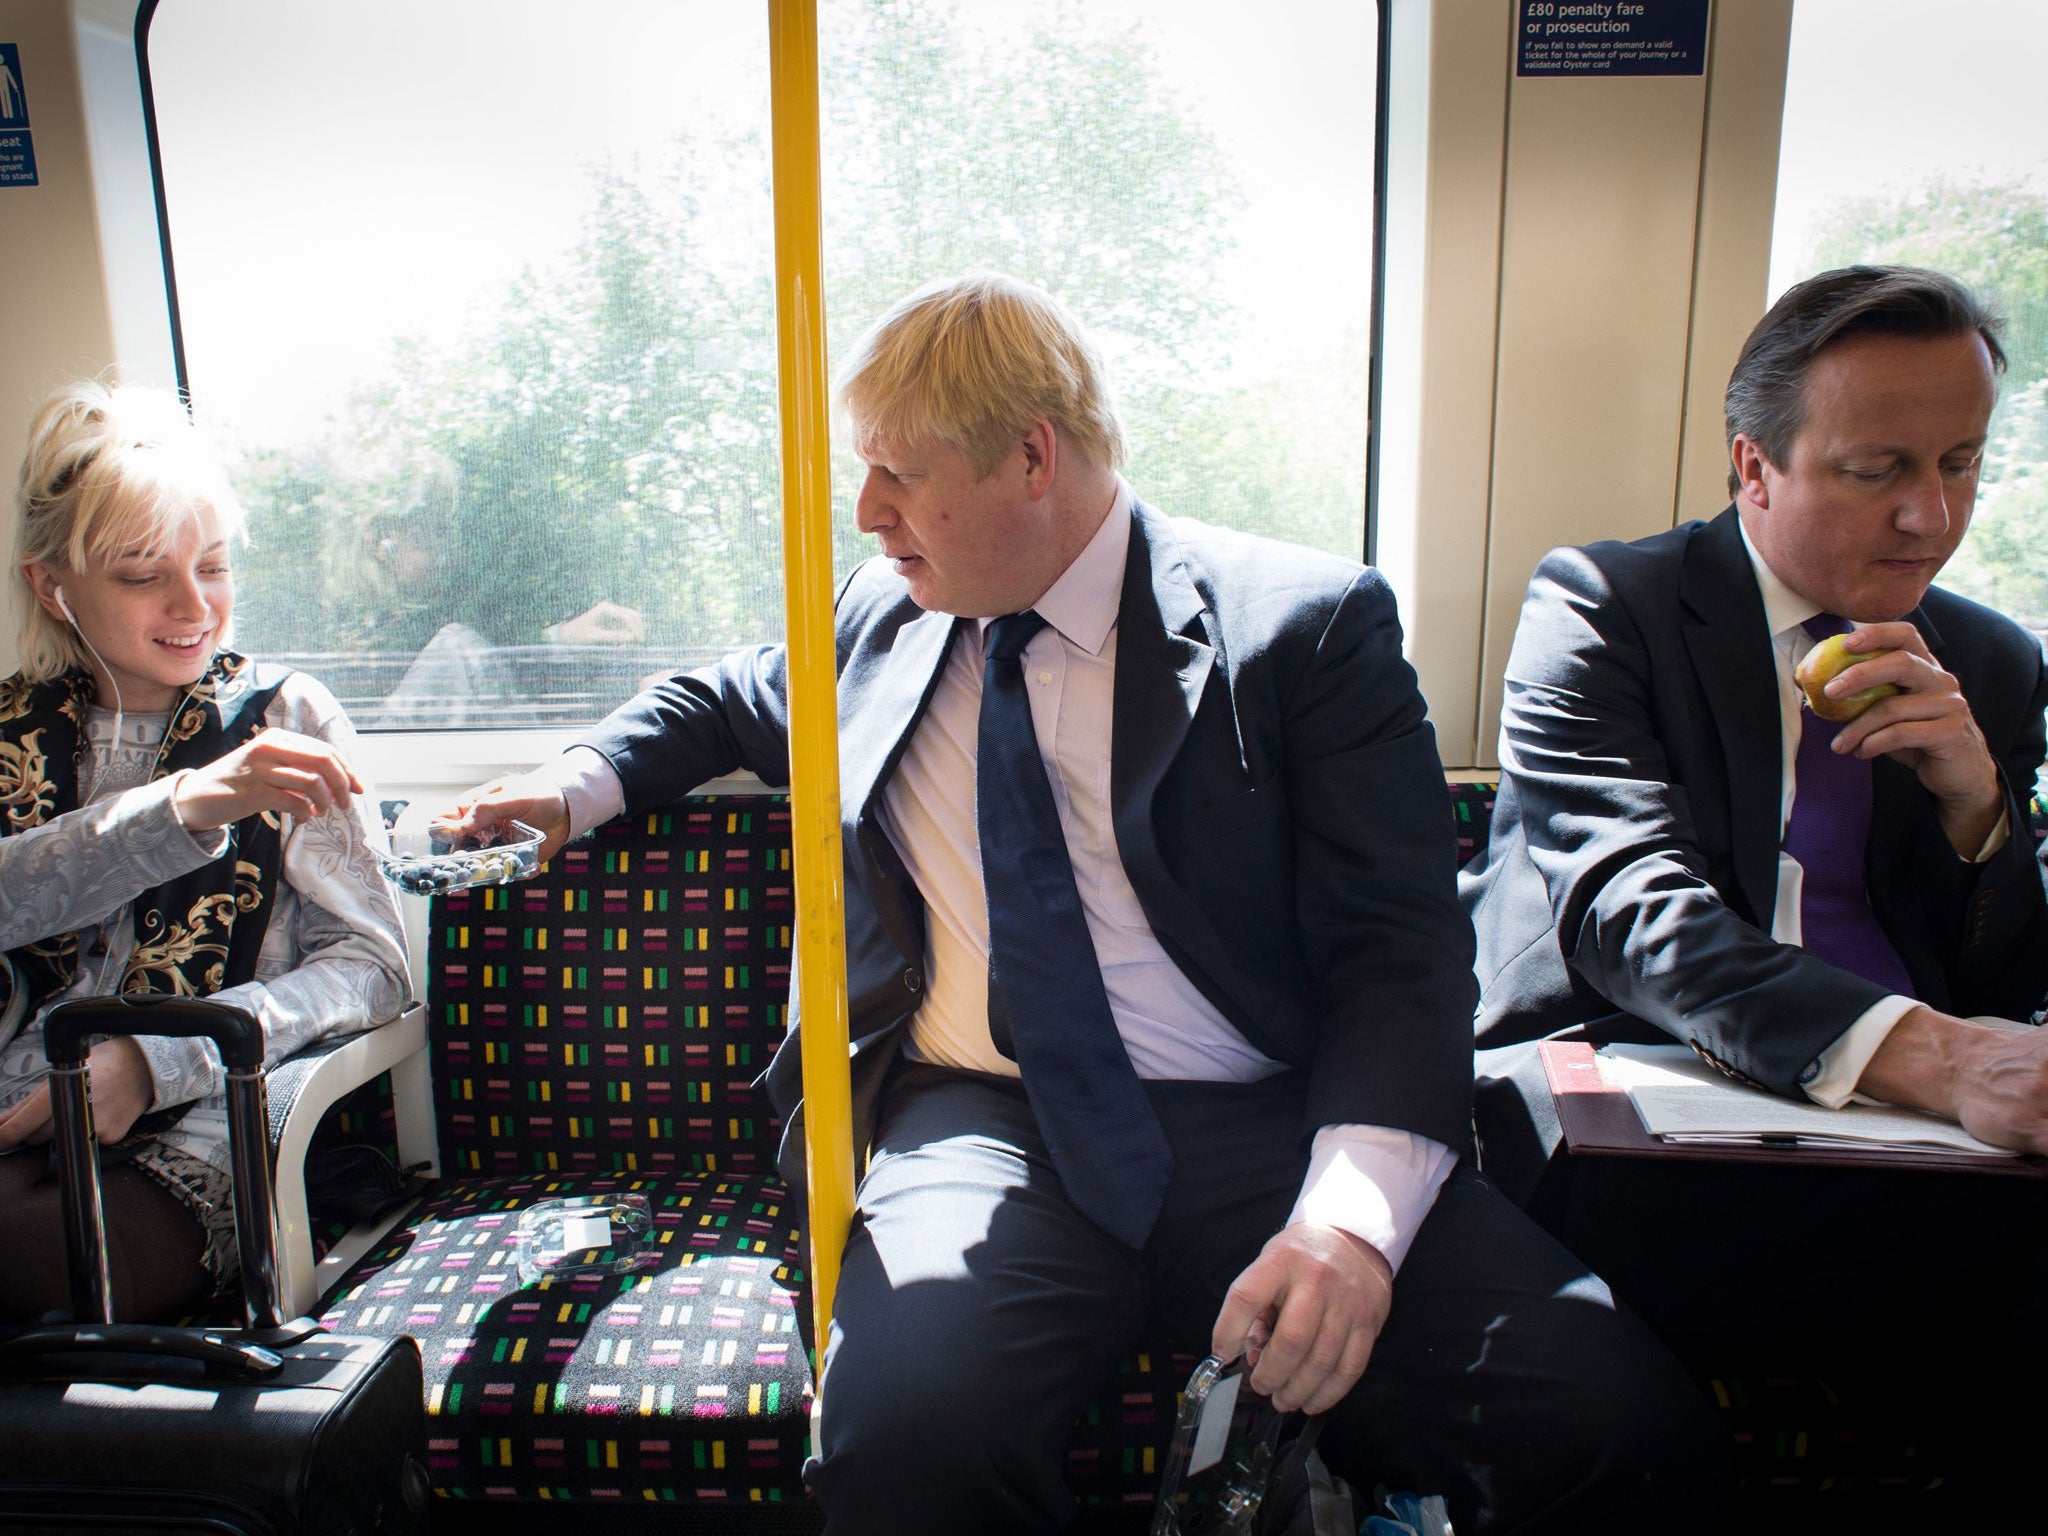 Who would you want holding your hand after a faint, Boris Johnson or David Cameron?